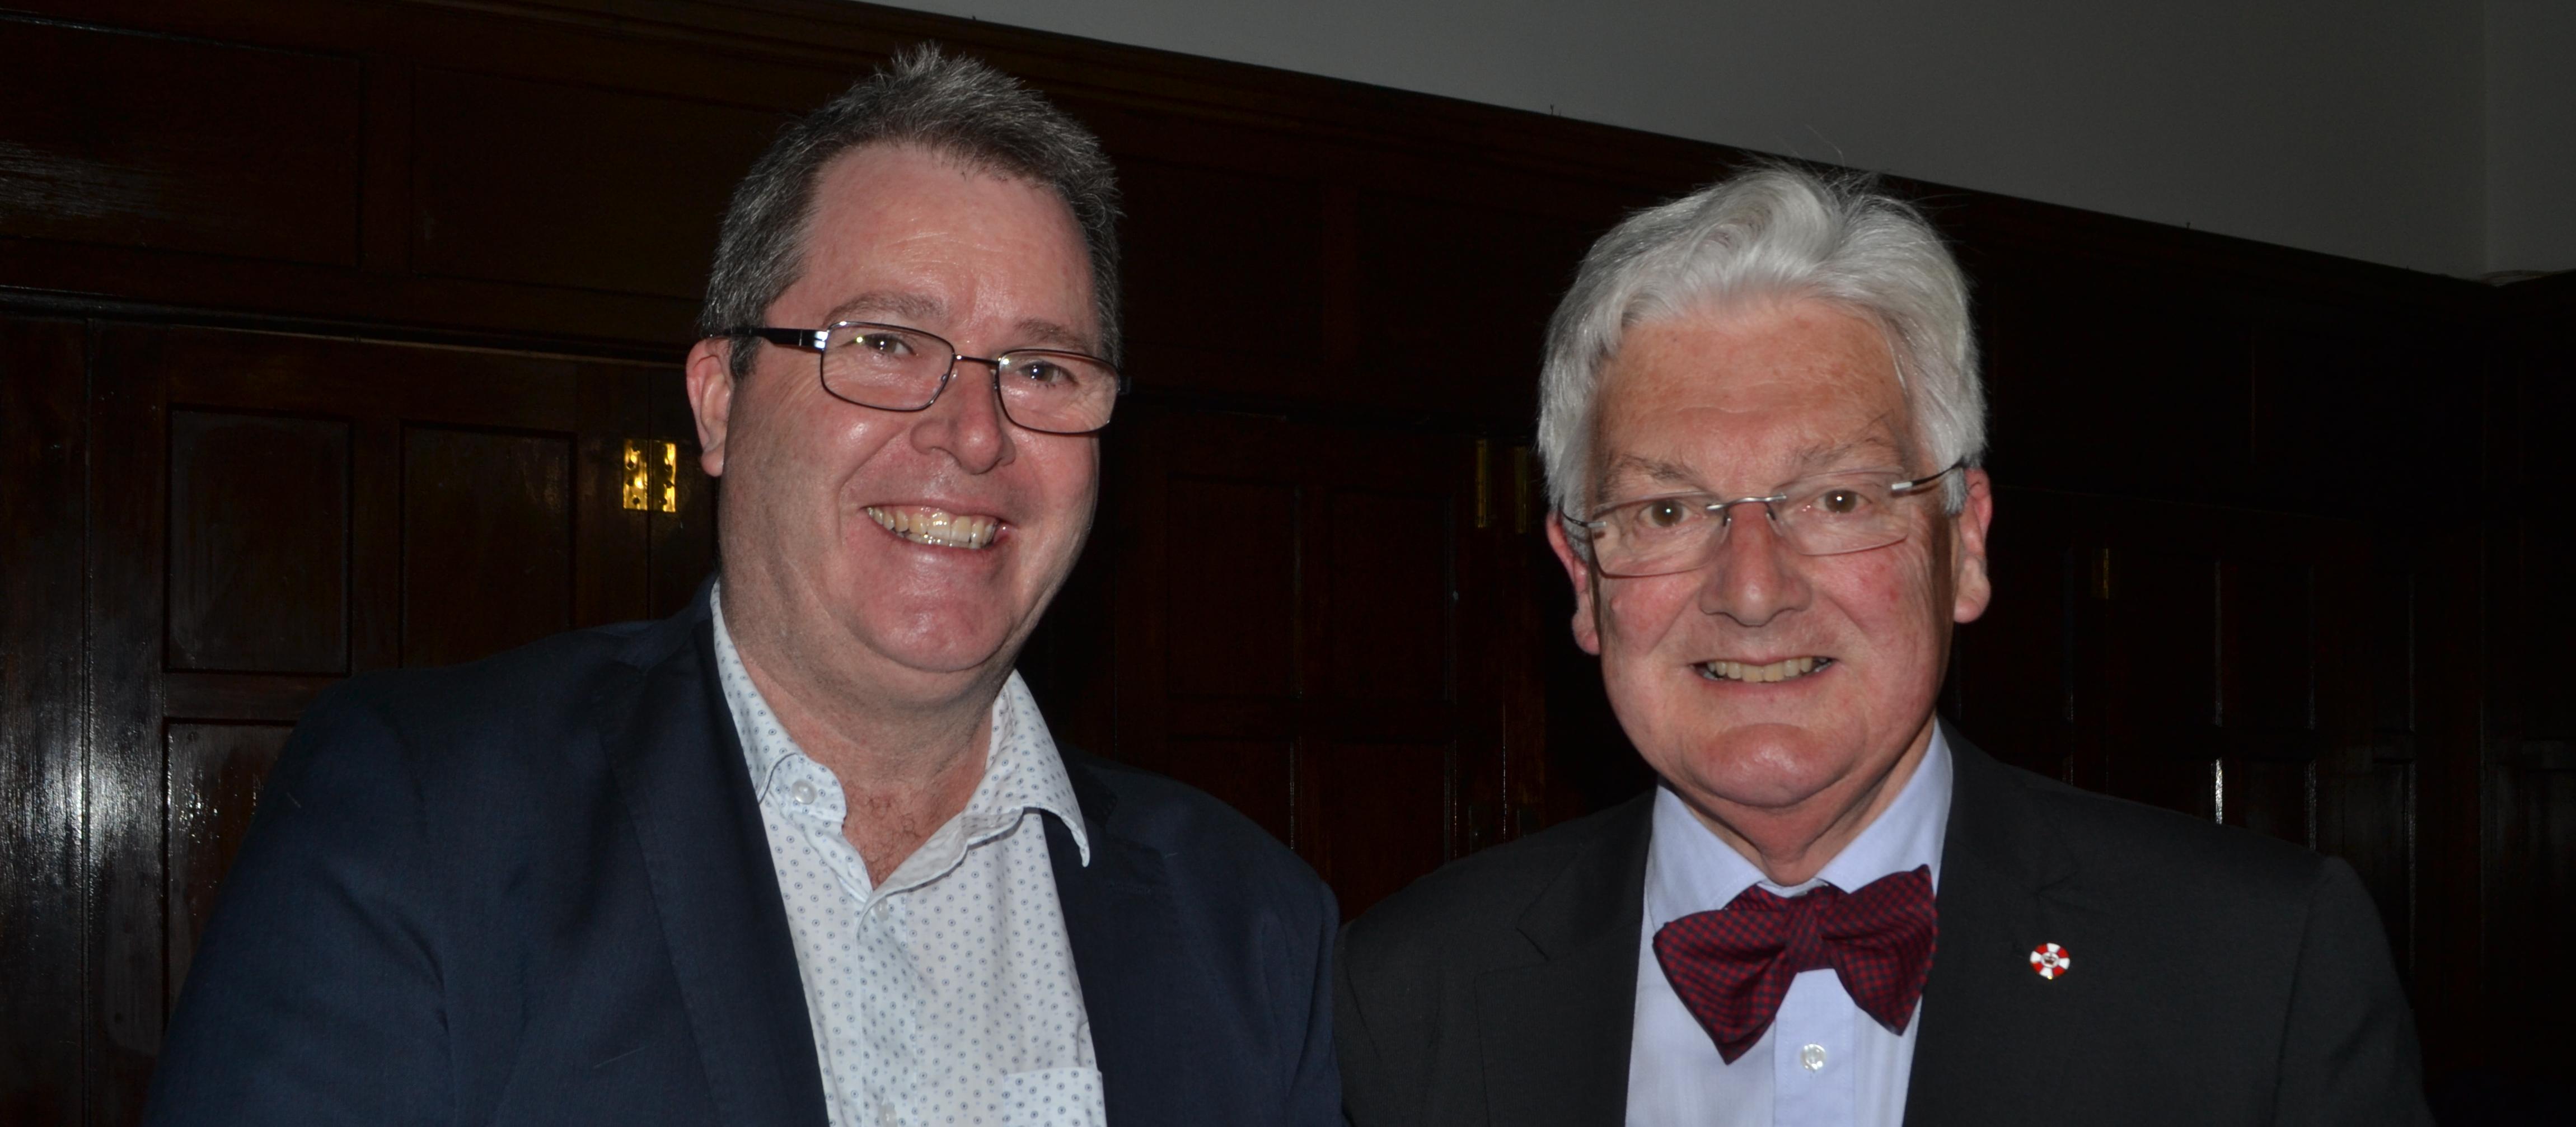 Pharmacy Guild chief executive Andrew Gaudin and retired politician Peter Dunne